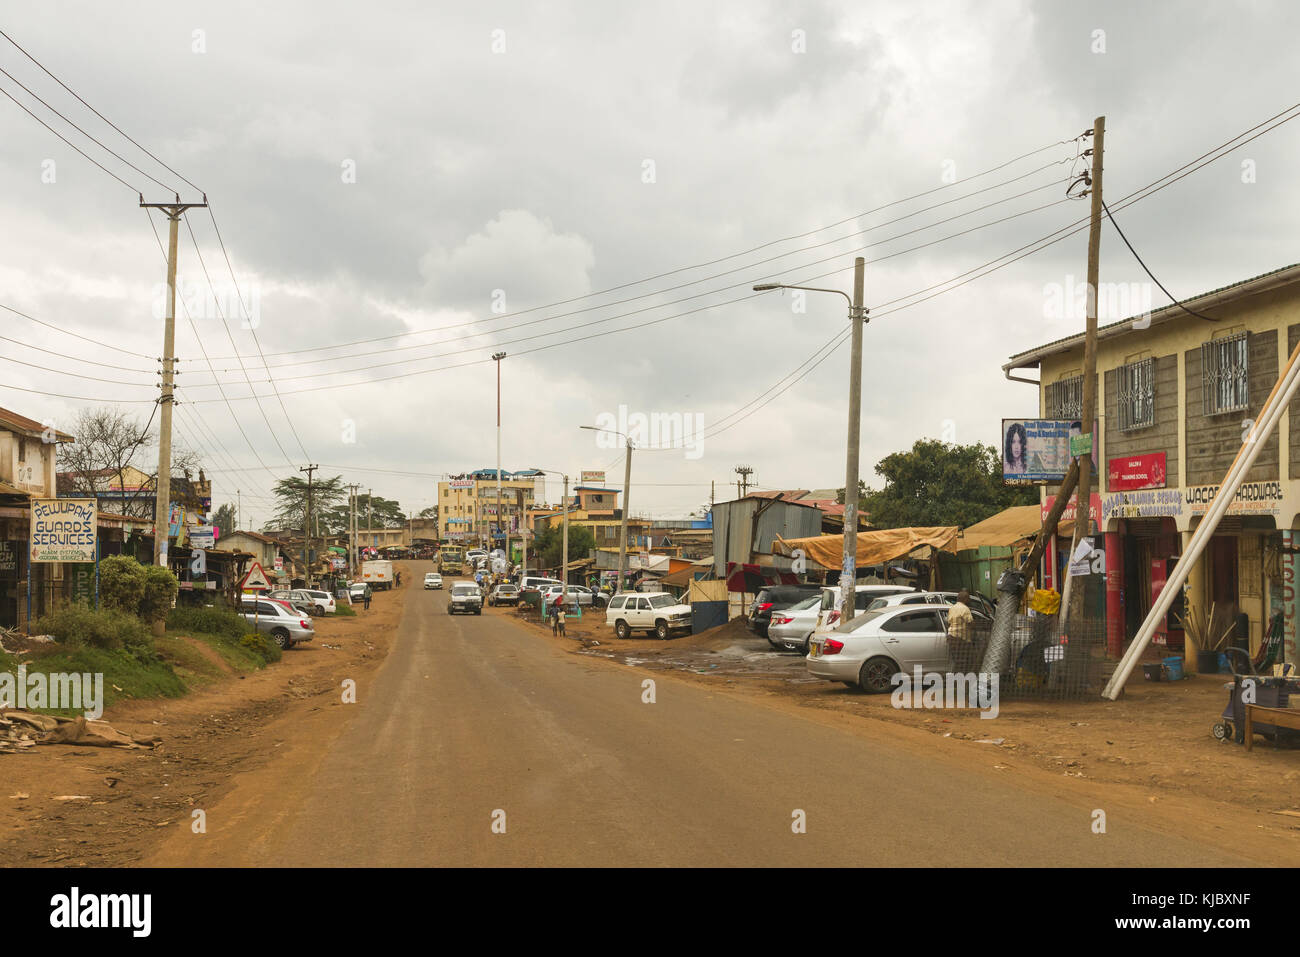 Gachie town main road with shops and people lining the road, Kenya, East Africa Stock Photo